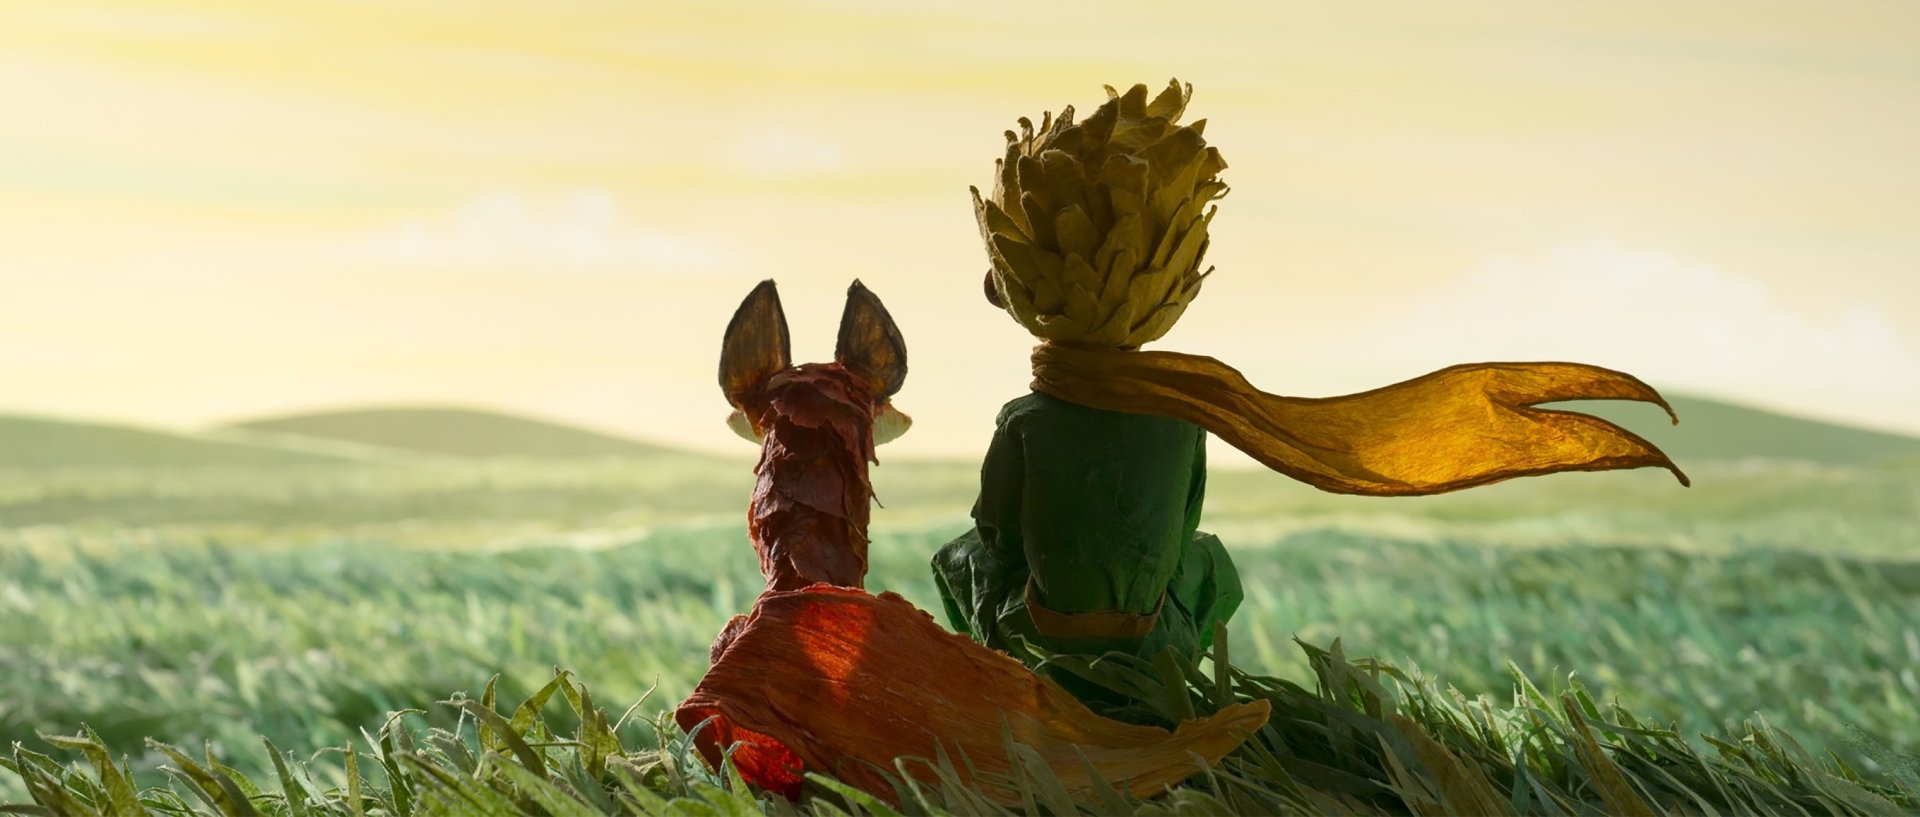 Little Prince And The Fox - HD Wallpaper 